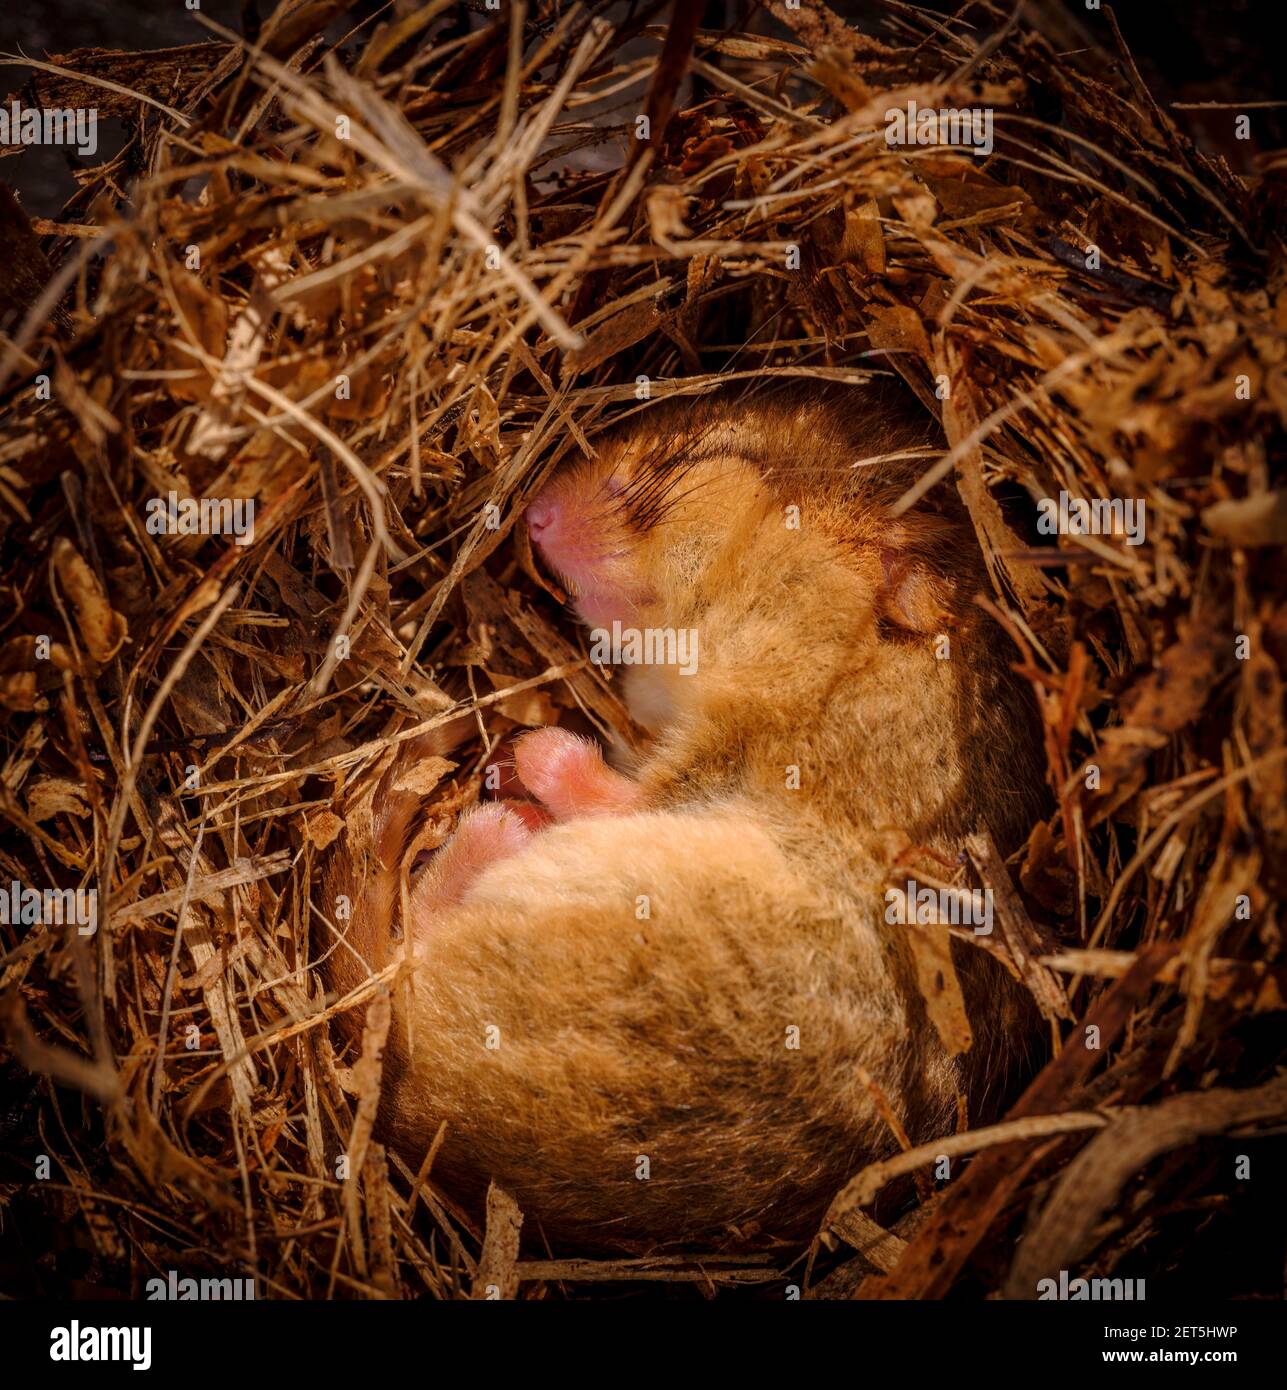 A hibernating dormouse on the first day of the meteorological spring, March 1st, viewed from above in its cosy nest of grass and straw. Jim Holden, UK Stock Photo